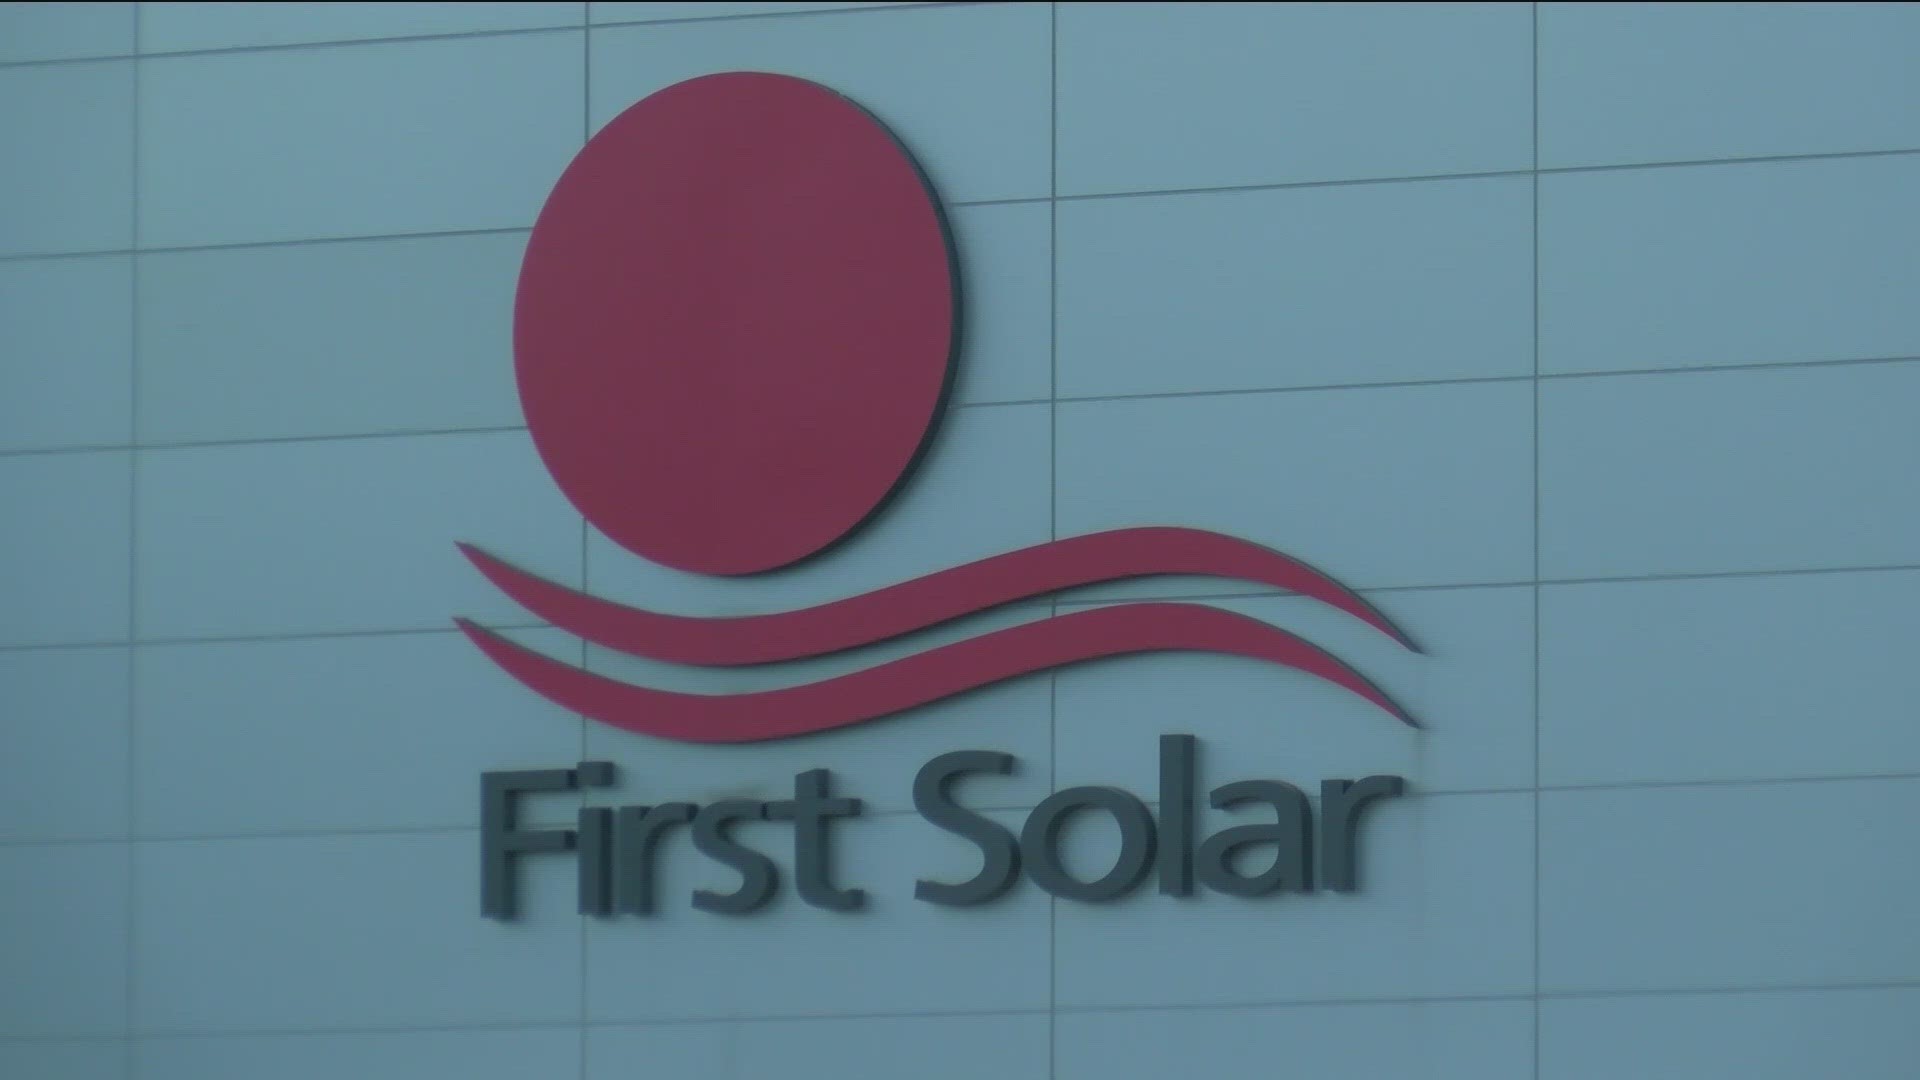 First Solar says panels on the governor's mansion falsely labeled as Toledo Solar modules built in the United States are actually their products made in Malaysia.